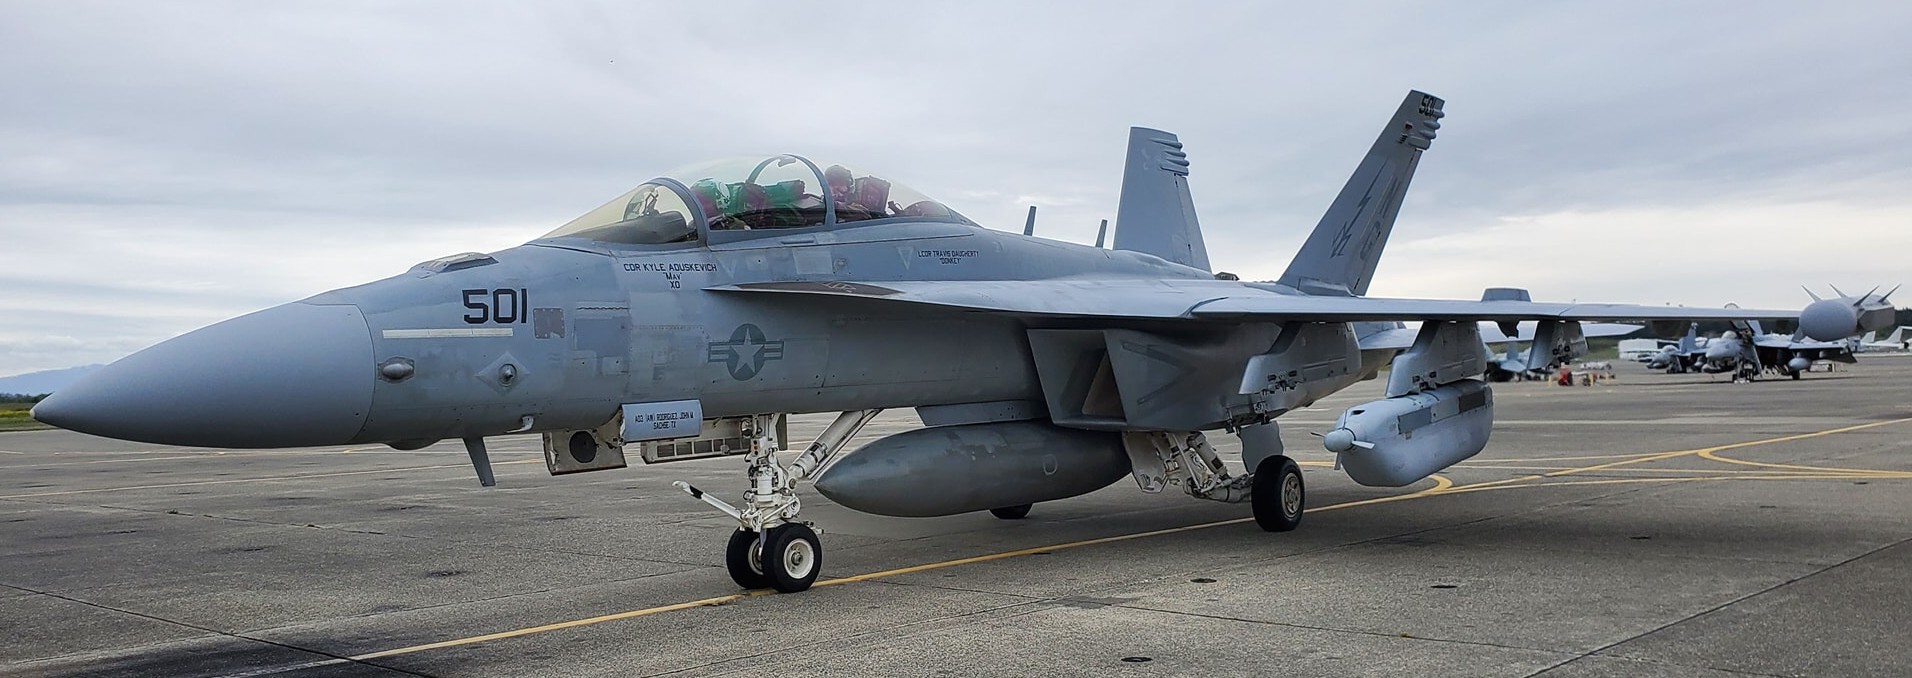 vaq-133 wizards electronic attack squadron vaqron us navy boeing ea-18g growler nas whidbey island 72